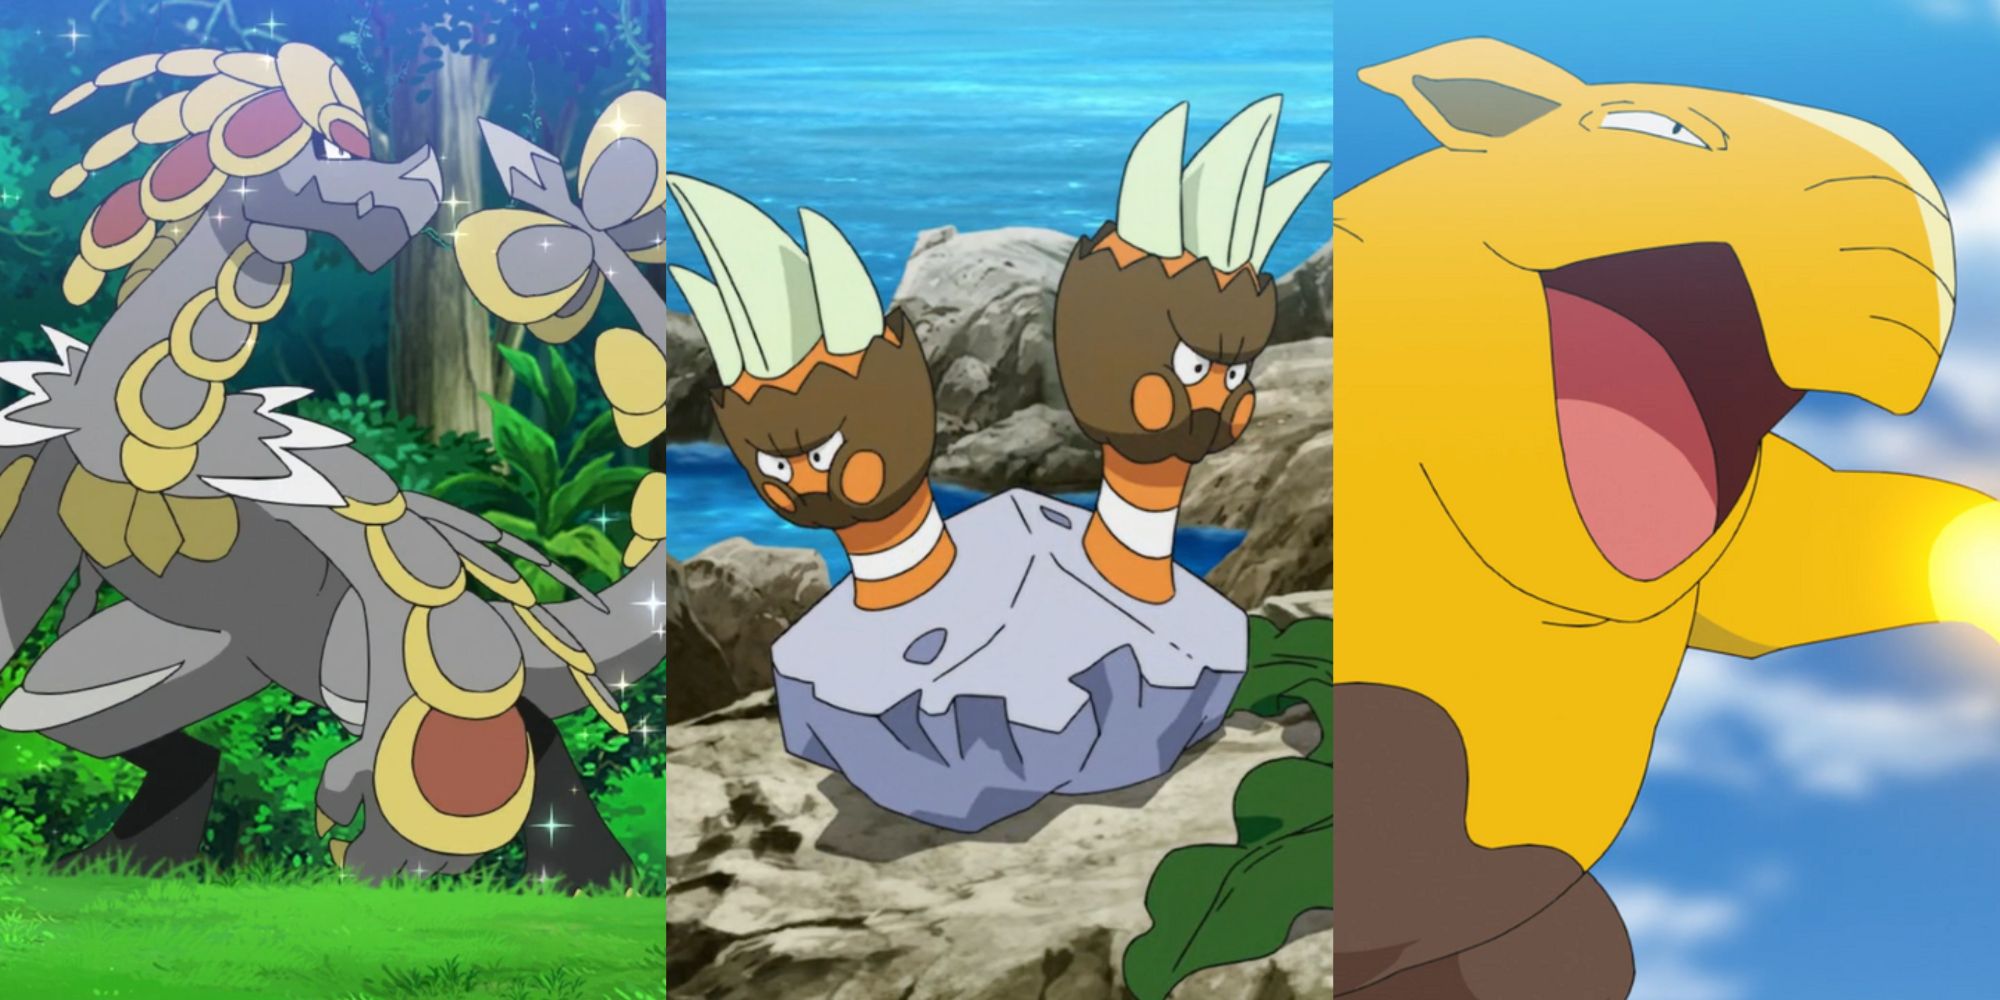 20 Pokémon characters inspired by real wild animals - Discover Wildlife